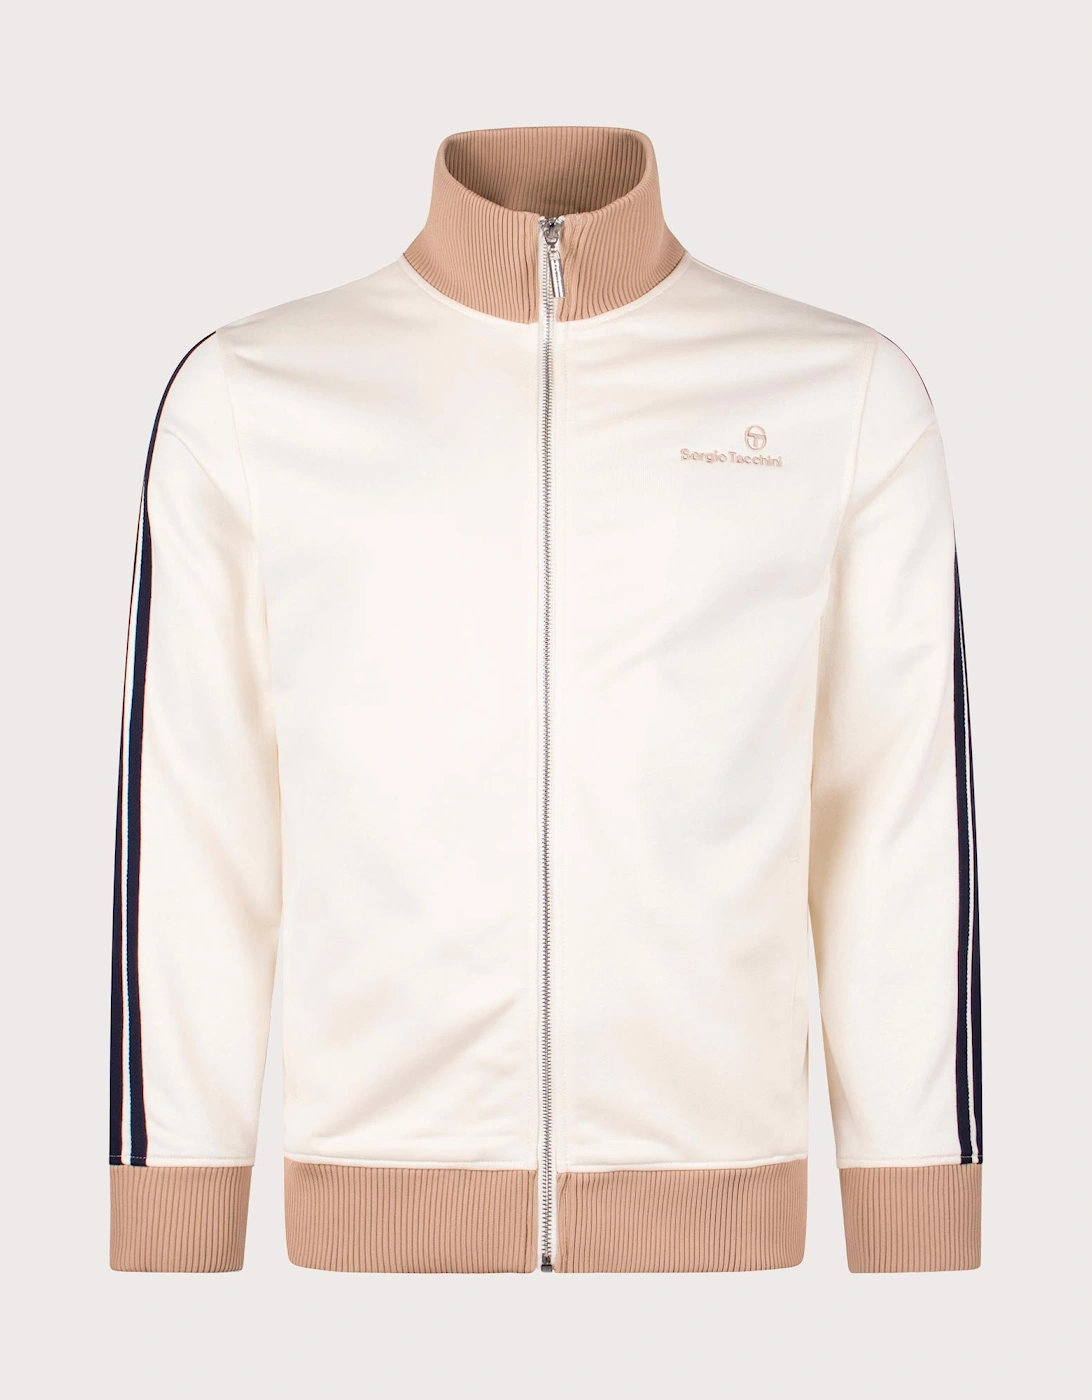 Adriano Track Top